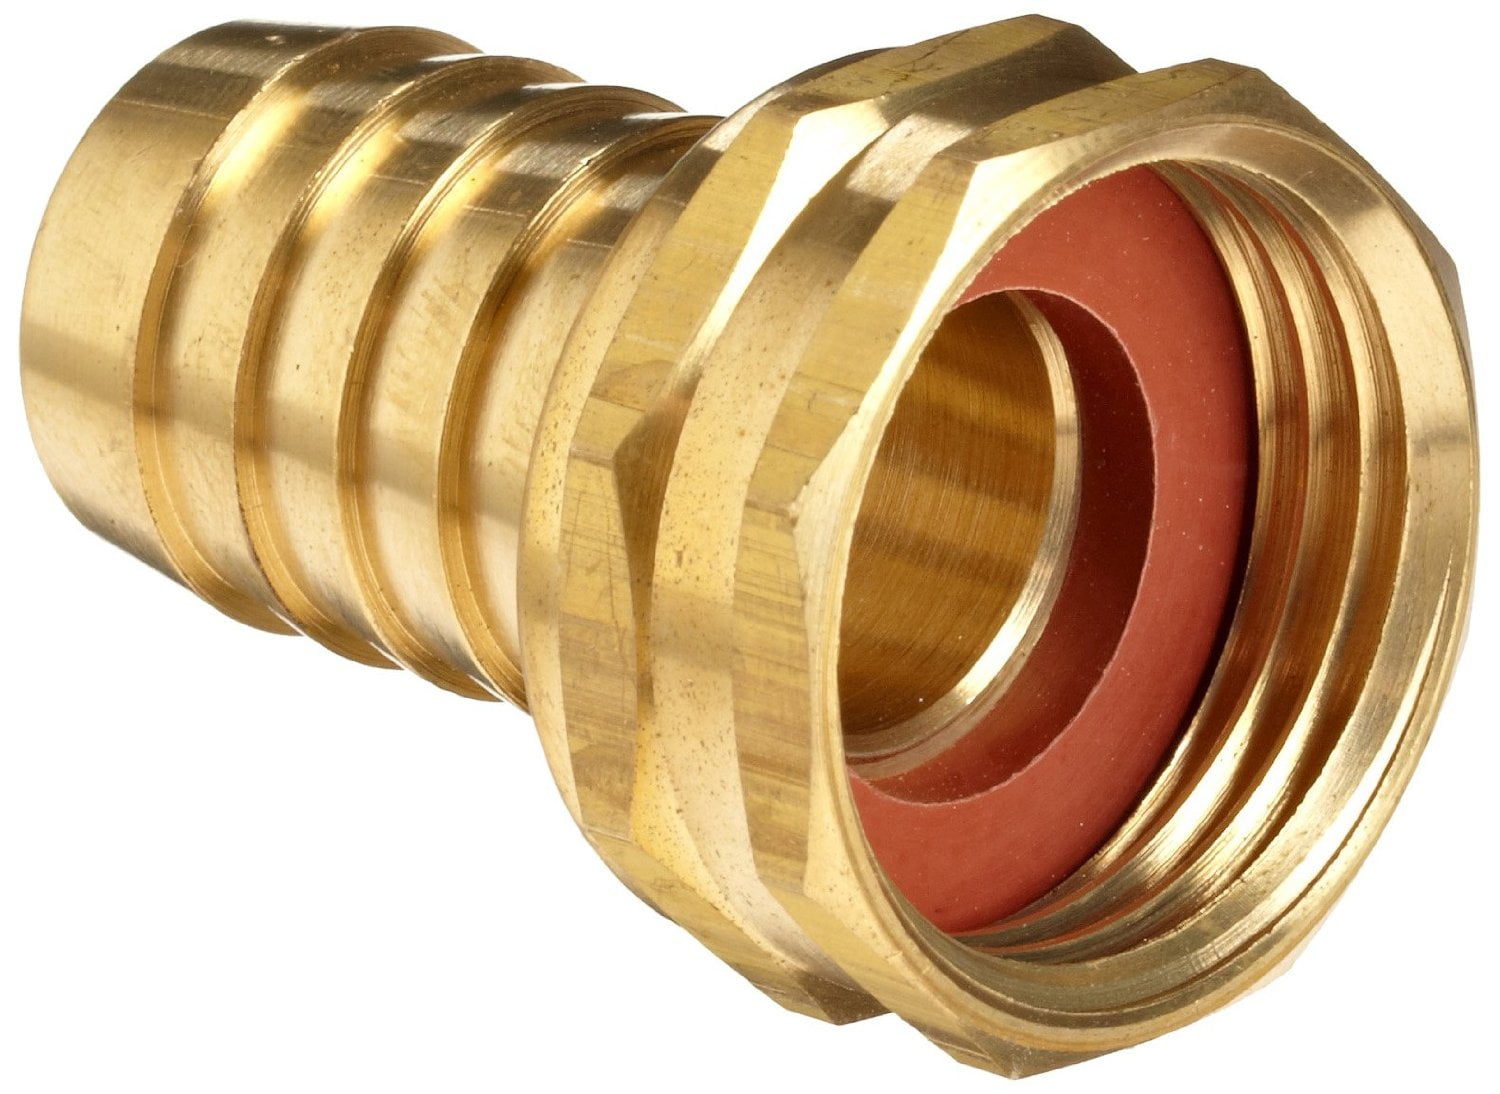 Brass Hose Tap Connector 3/4" Threaded Garden Water Pipe Adaptor Fitting Parts 